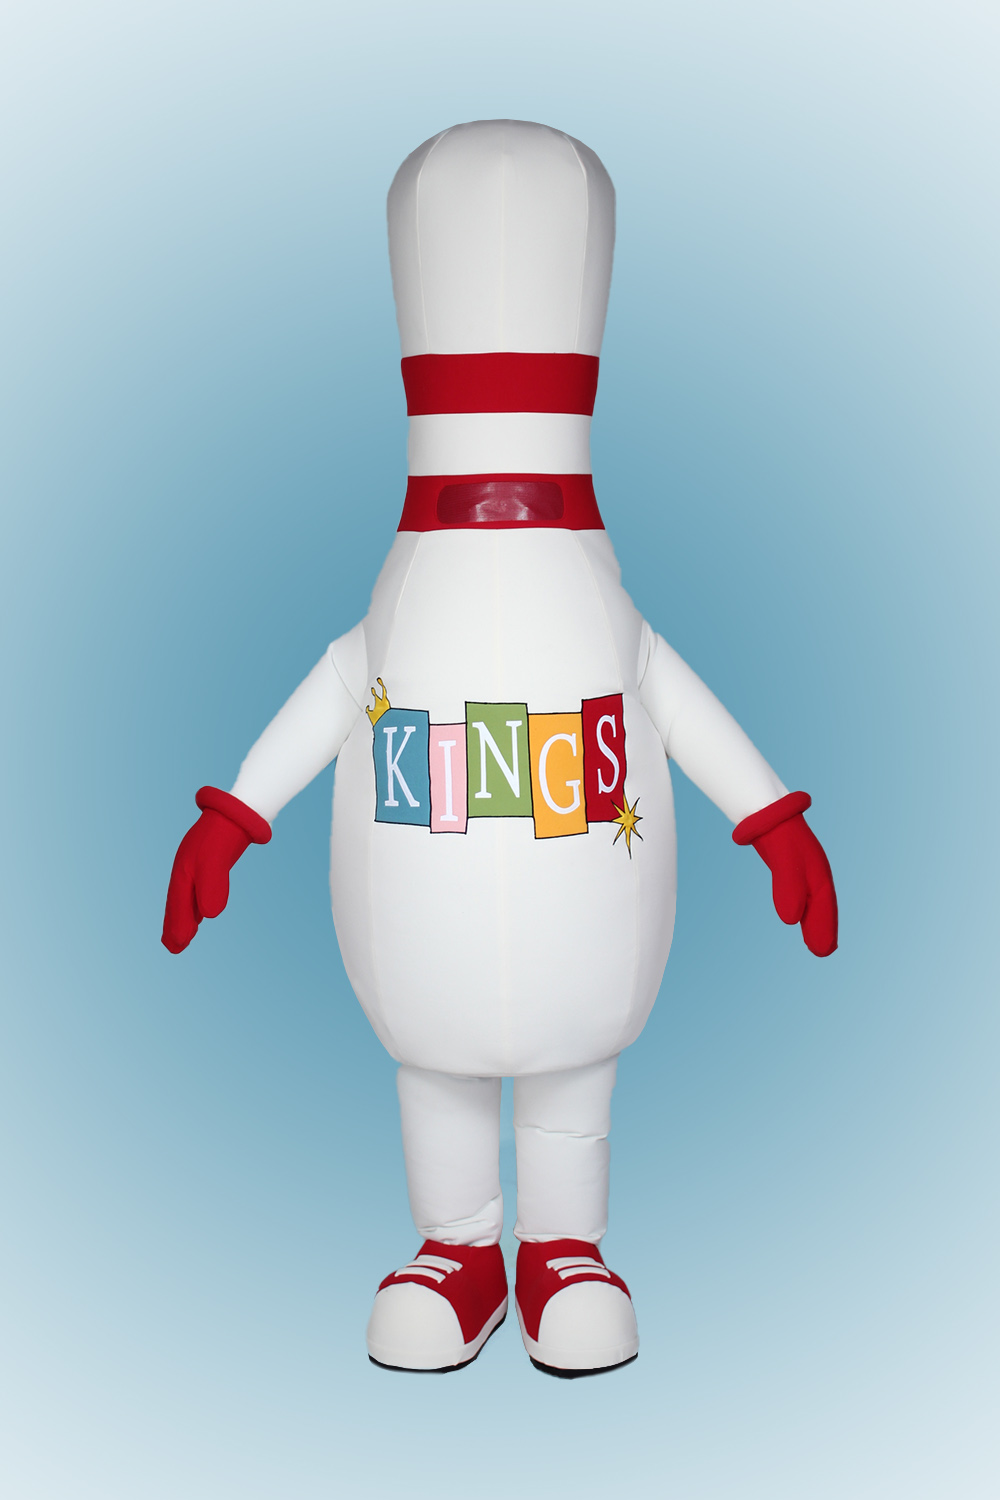 Bowling Pin Mascot Costume by Costume Specialists for King's Bowling